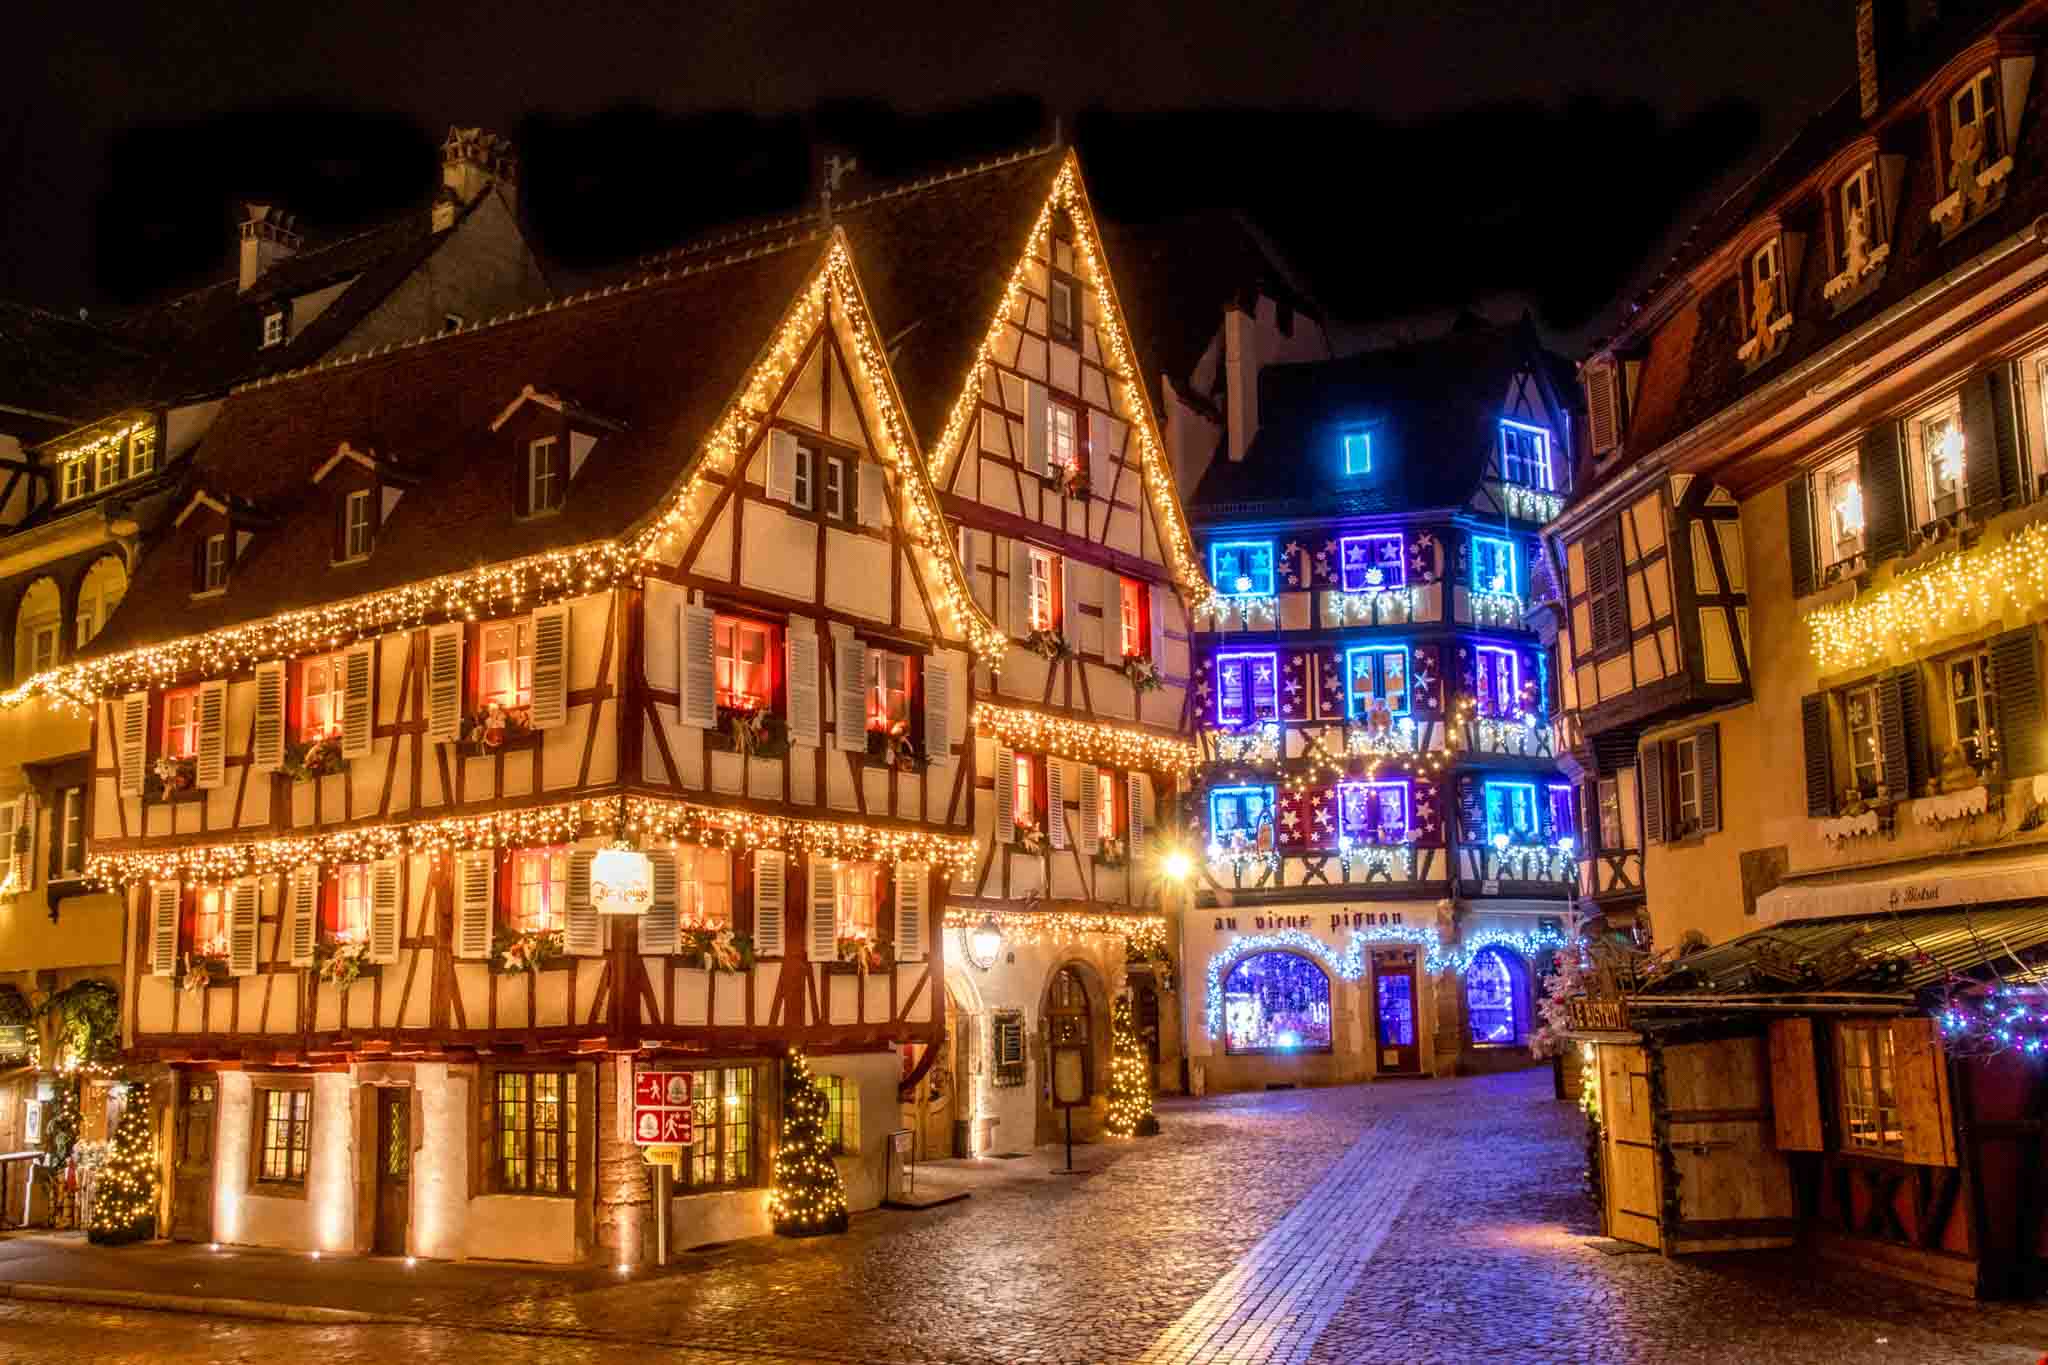 Half-timbered buildings lit up for Christmas